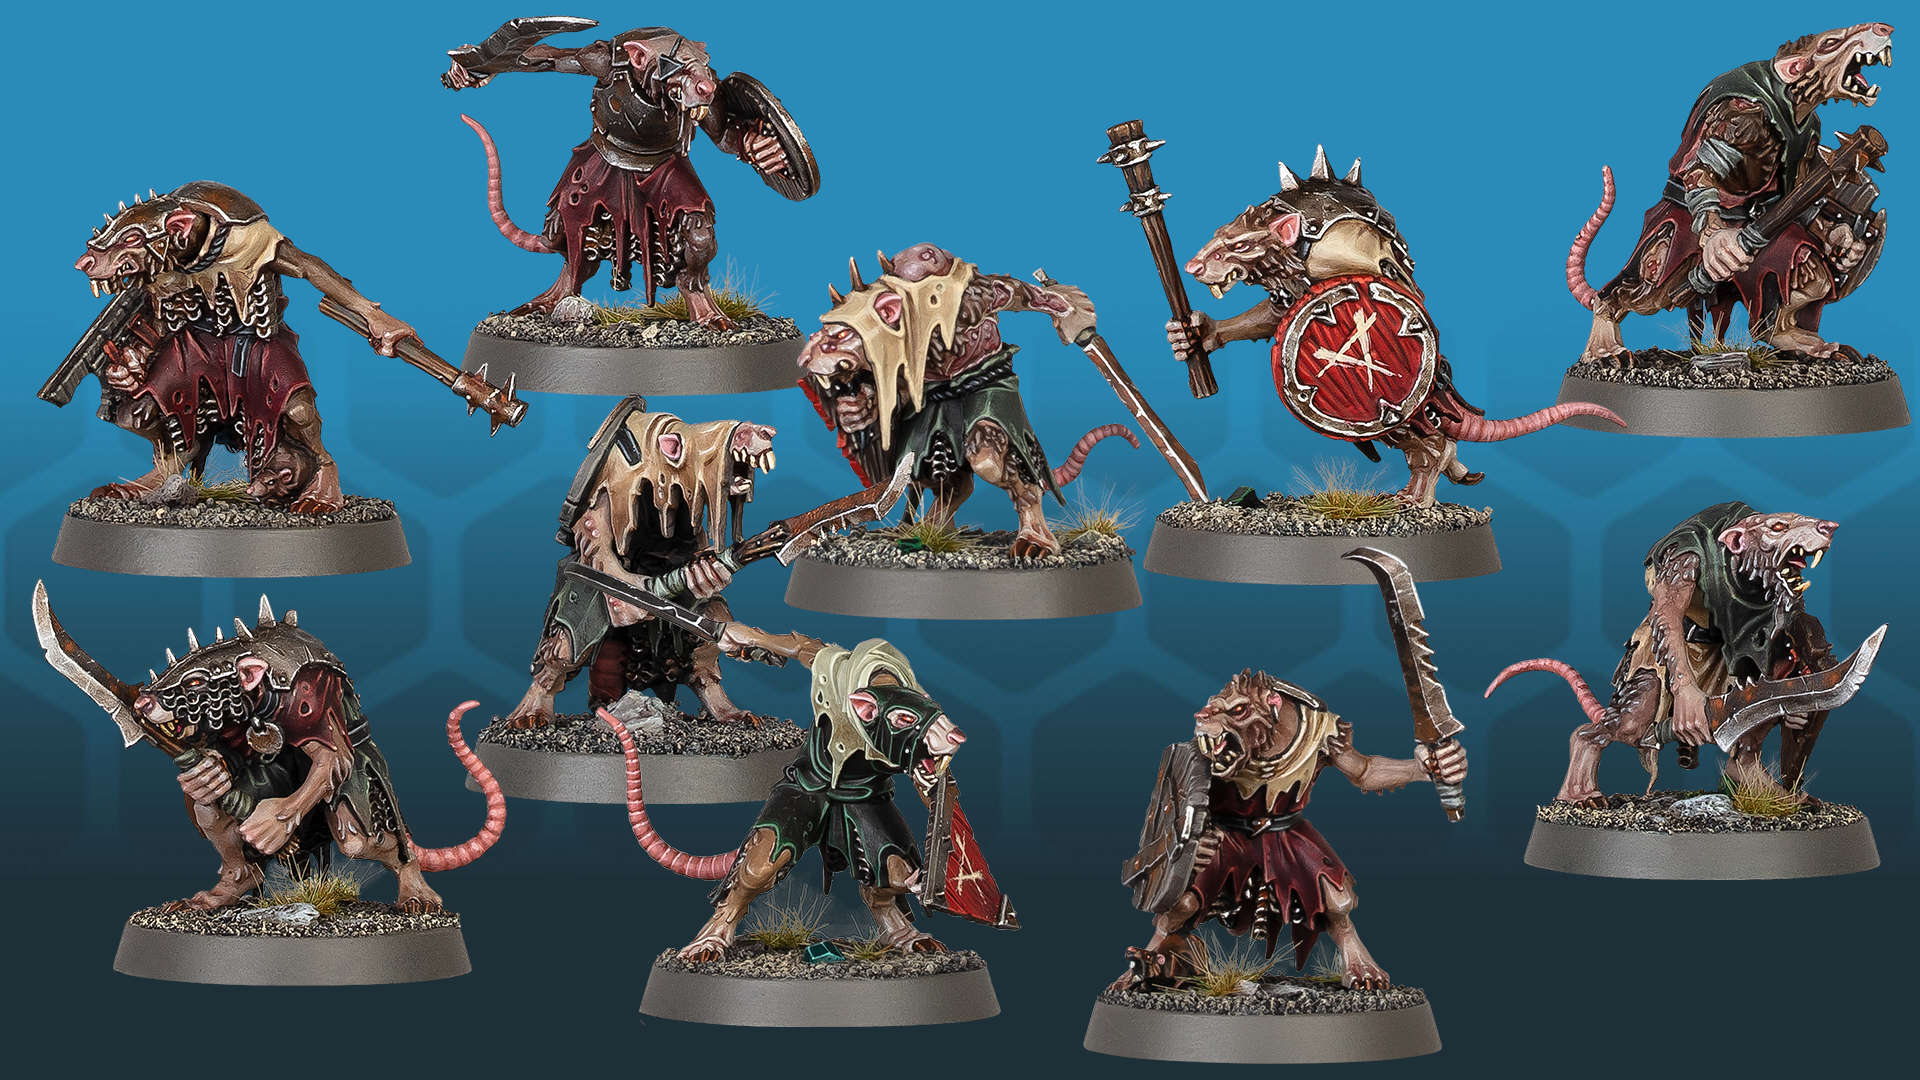 GW reveals new Age of Sigmar Skaven clanrats, yes-yes!